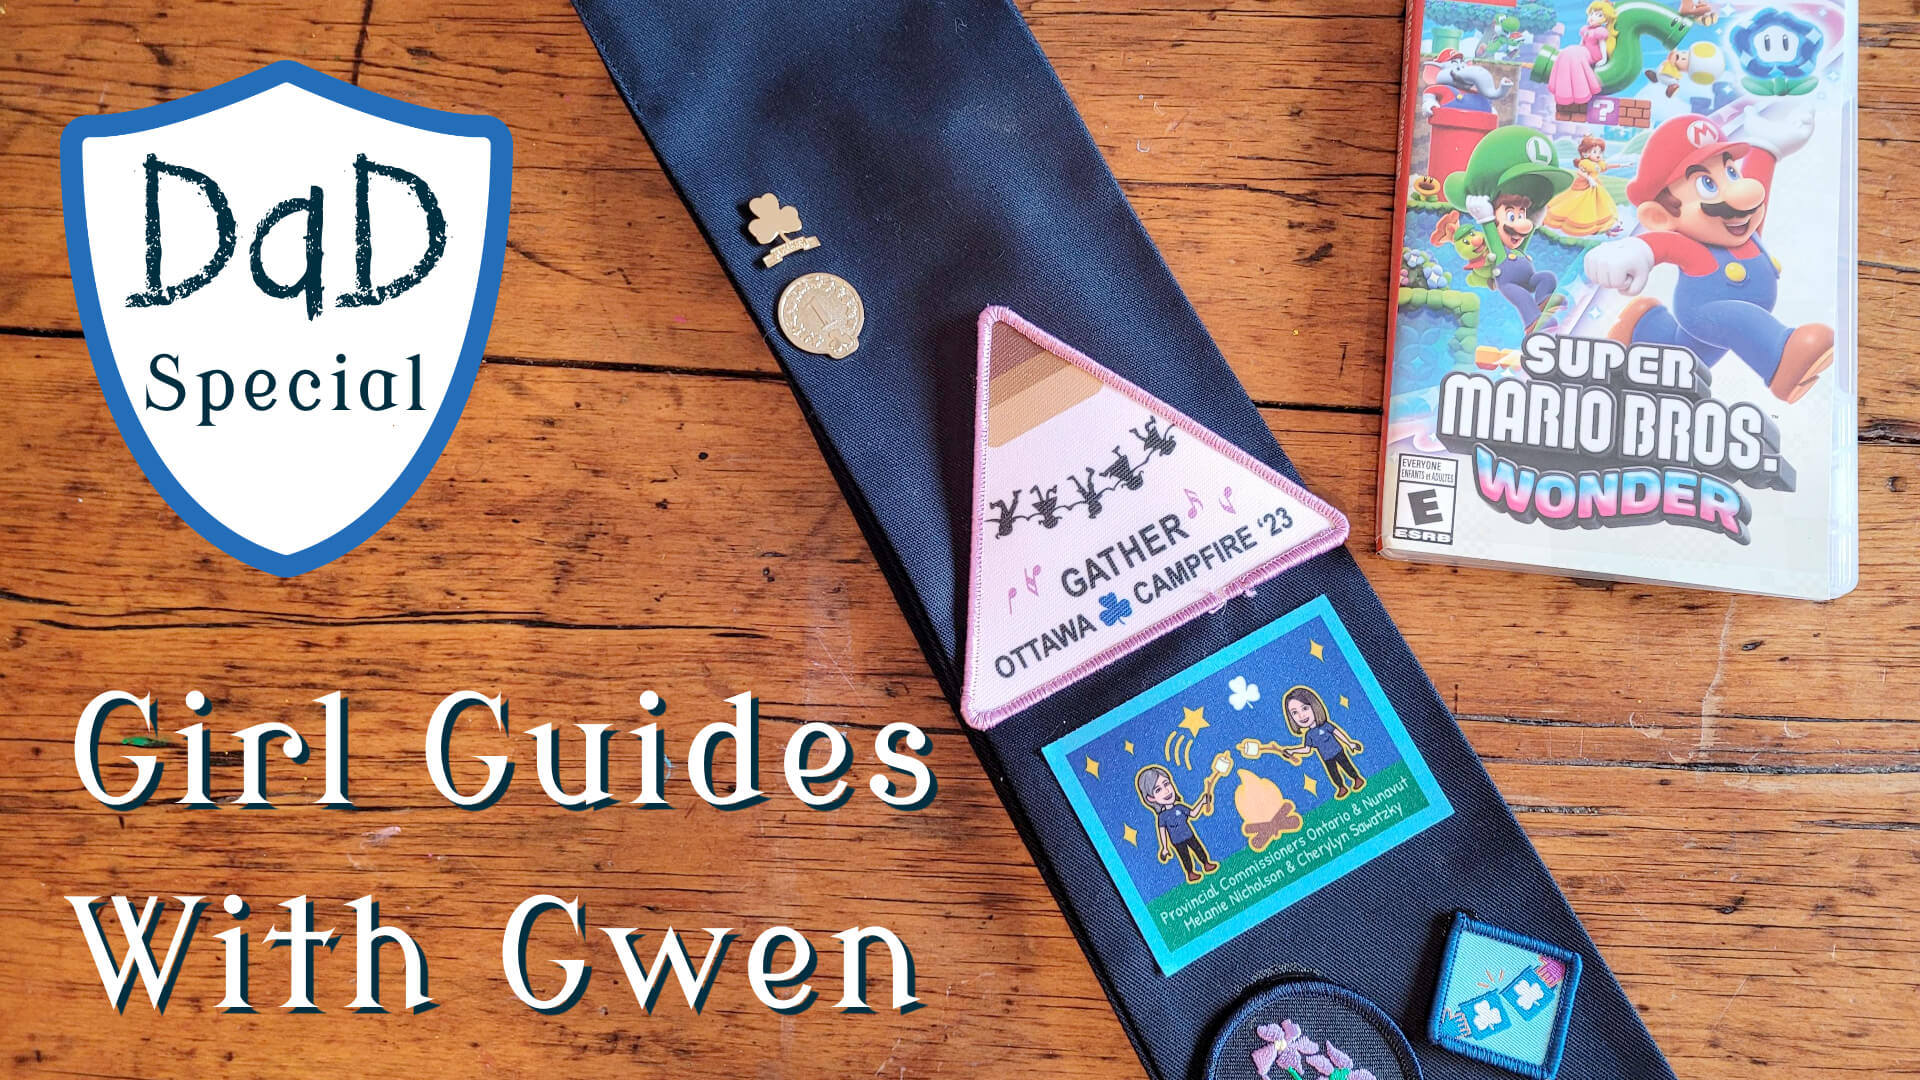 DaD Special - Girl Guides with Gwen